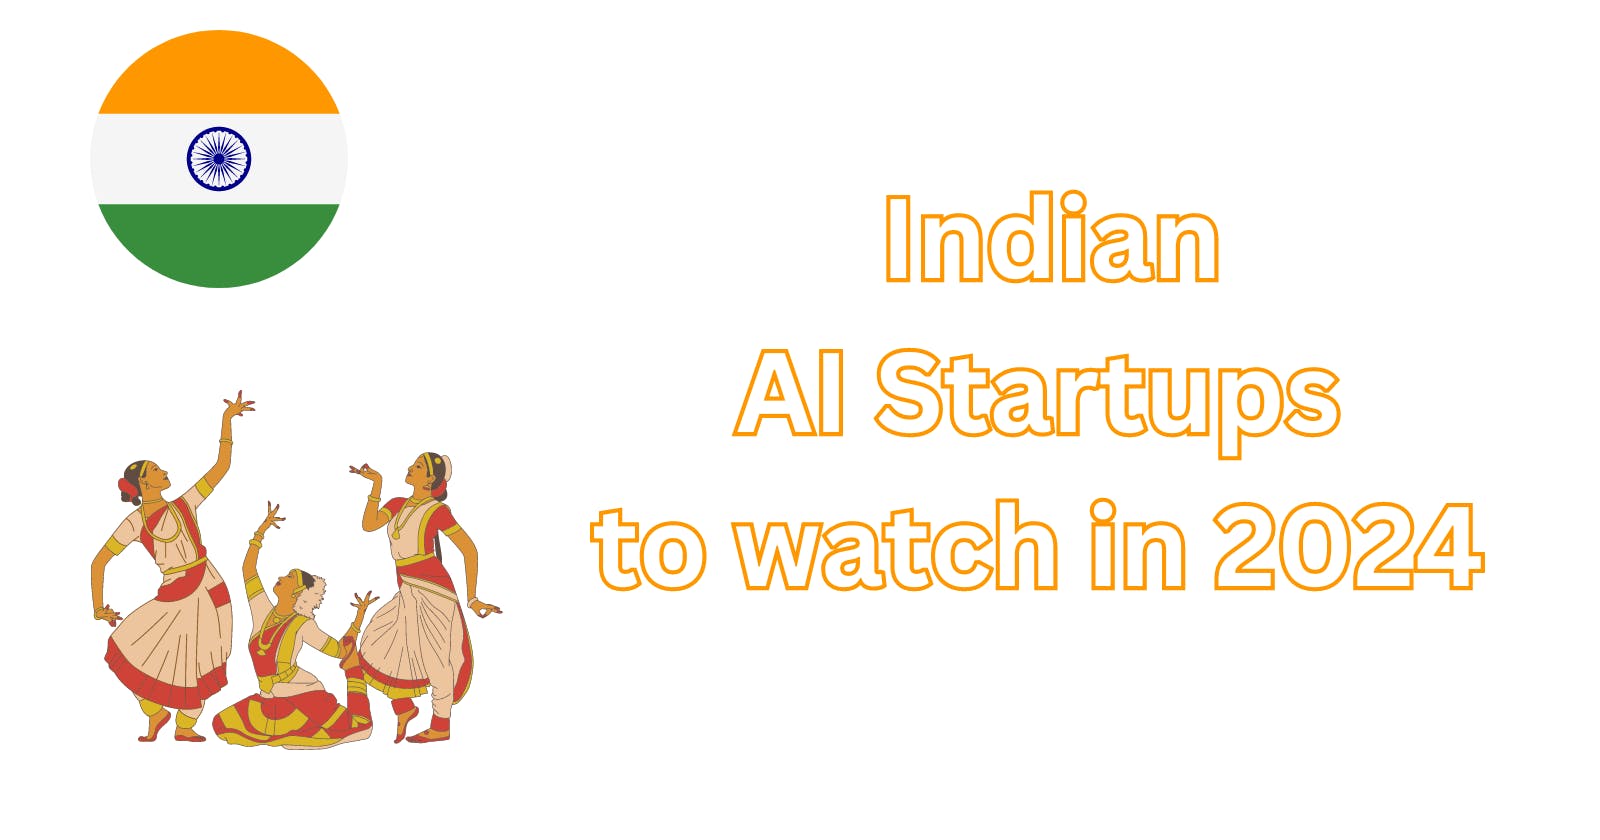 5 AI Startups From India to Watch Closely